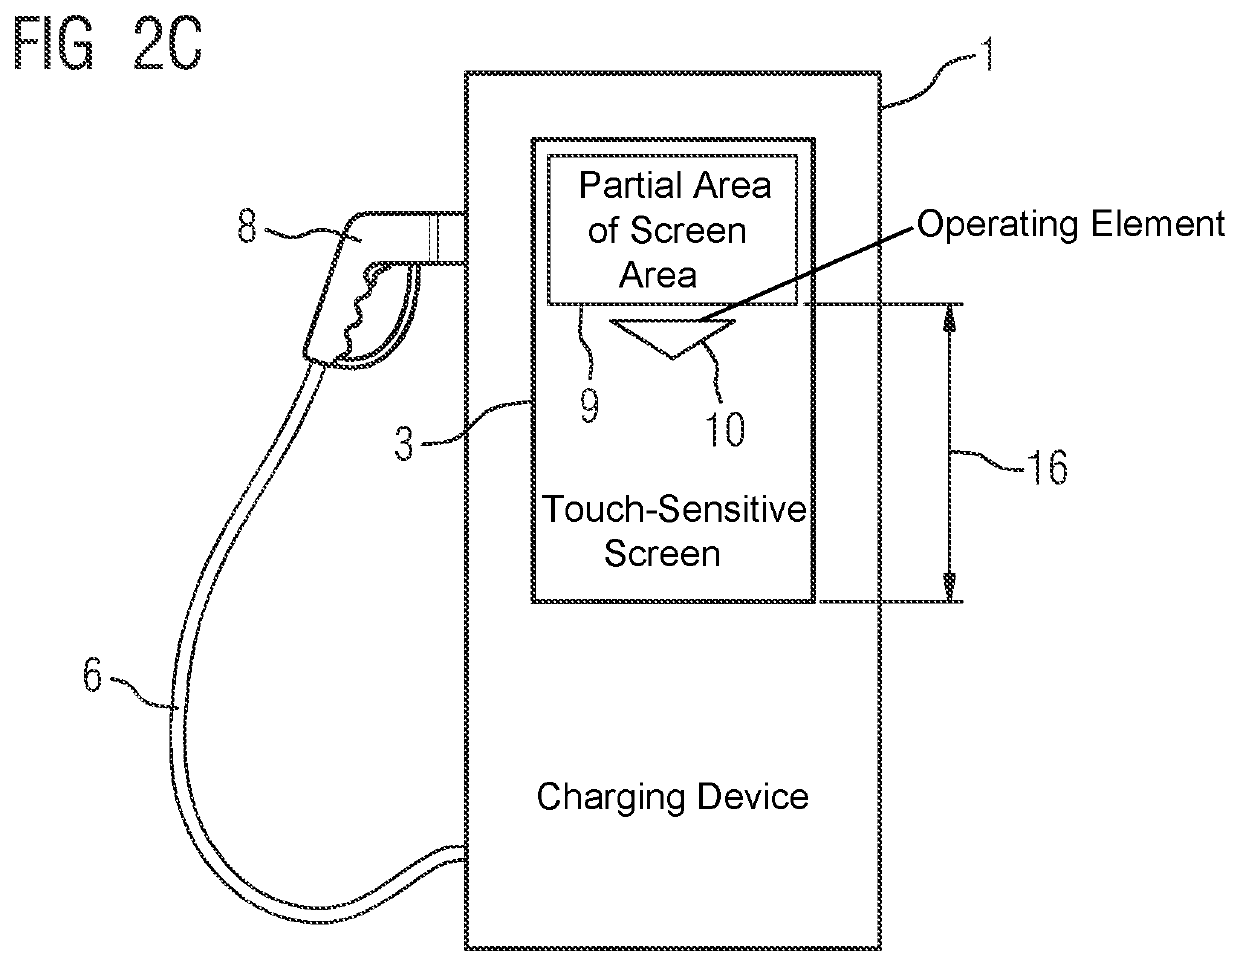 Accessible charging device